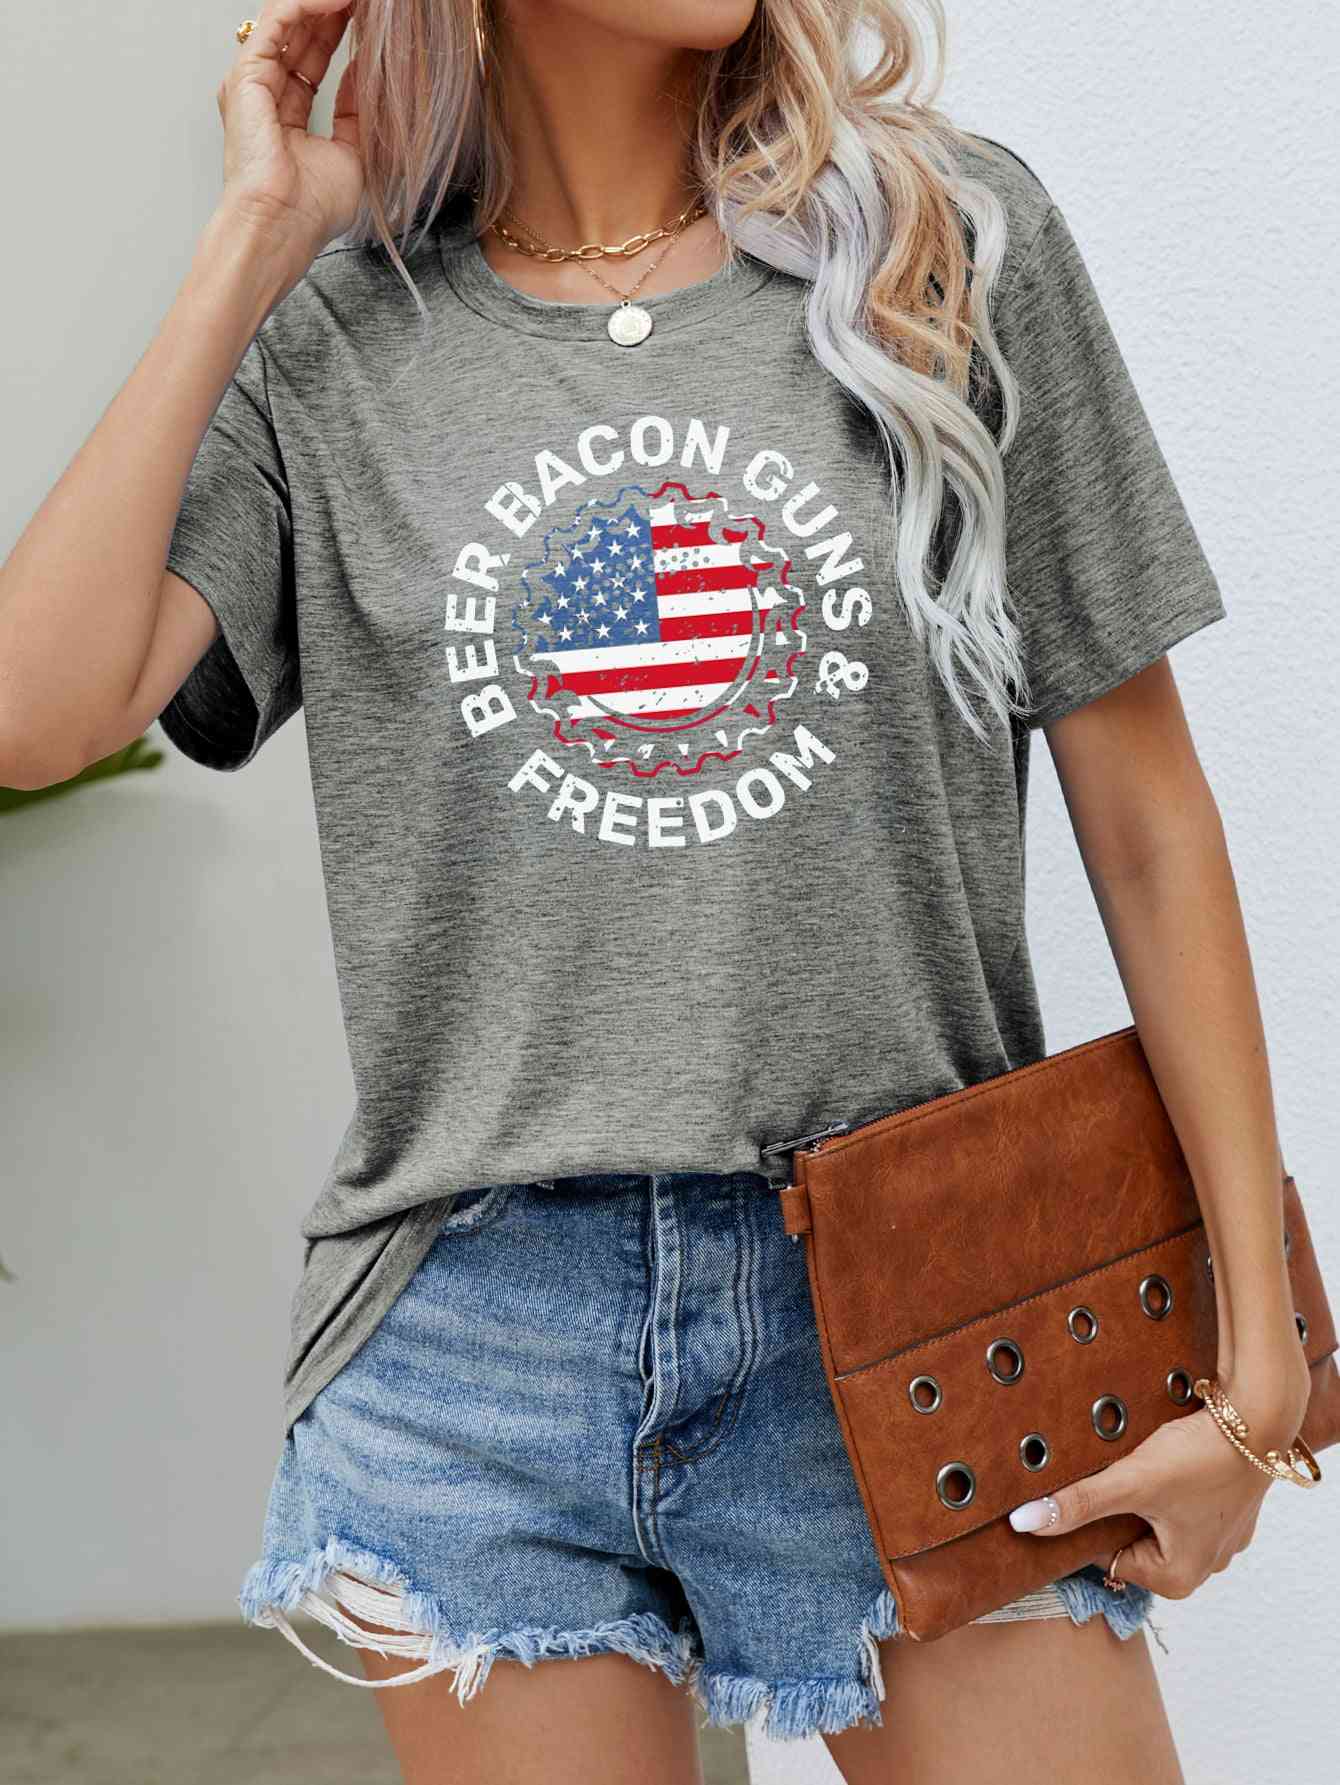 BEER BACON GUNS & FREEDOM US Flag Graphic Tee Mid Gray S 